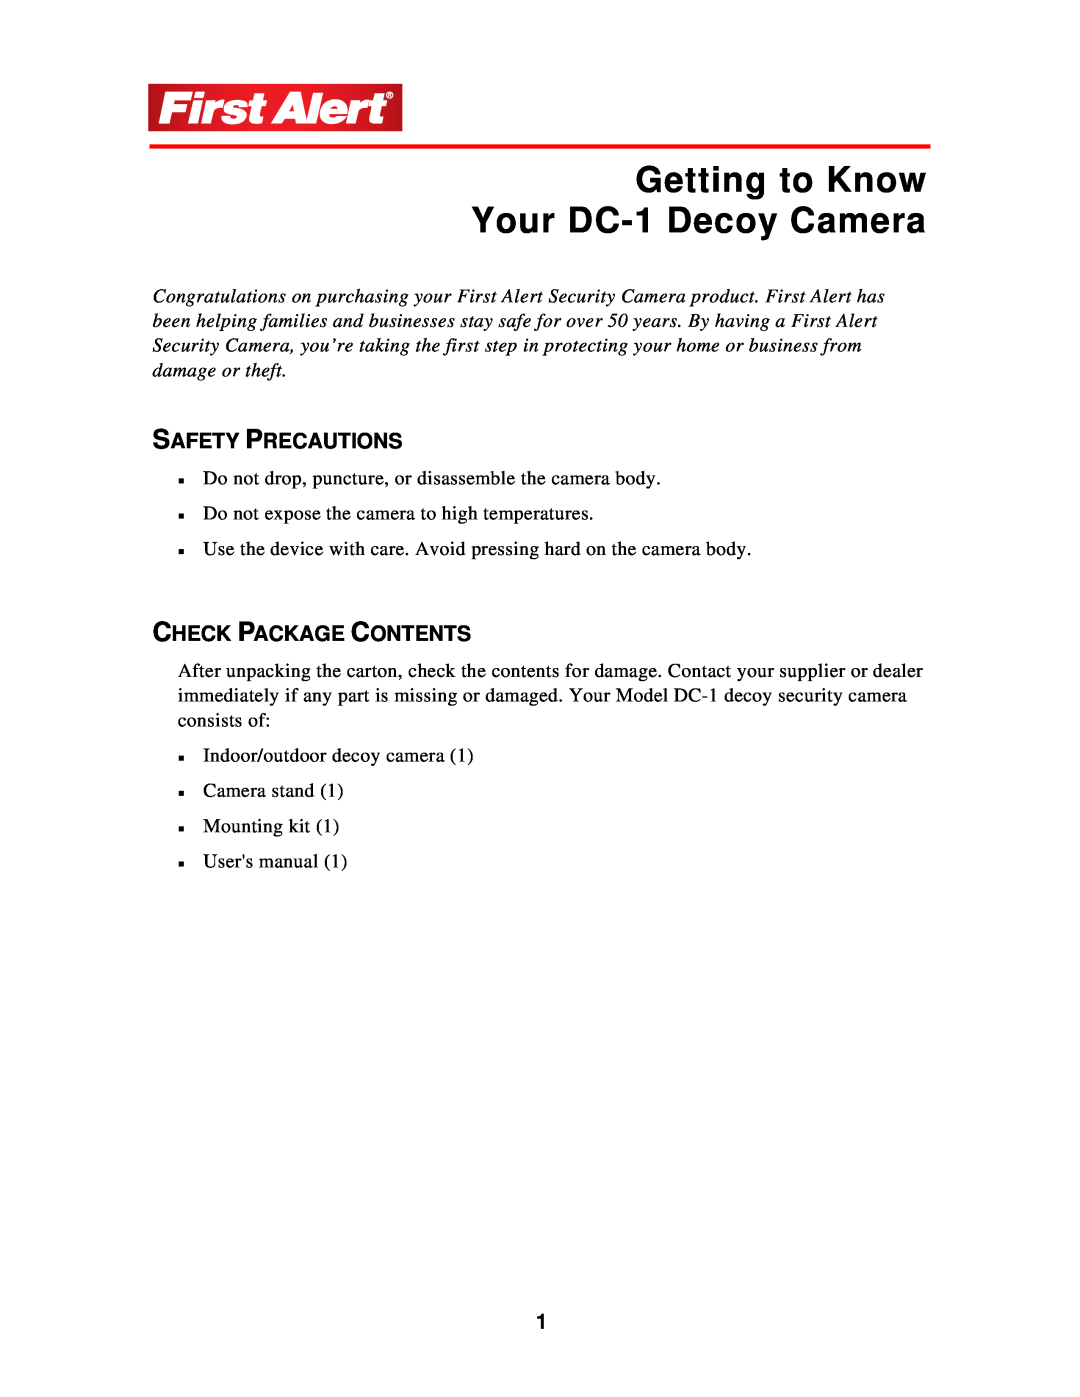 First Alert user manual Getting to Know Your DC-1 Decoy Camera, Safety Precautions, Check Package Contents 